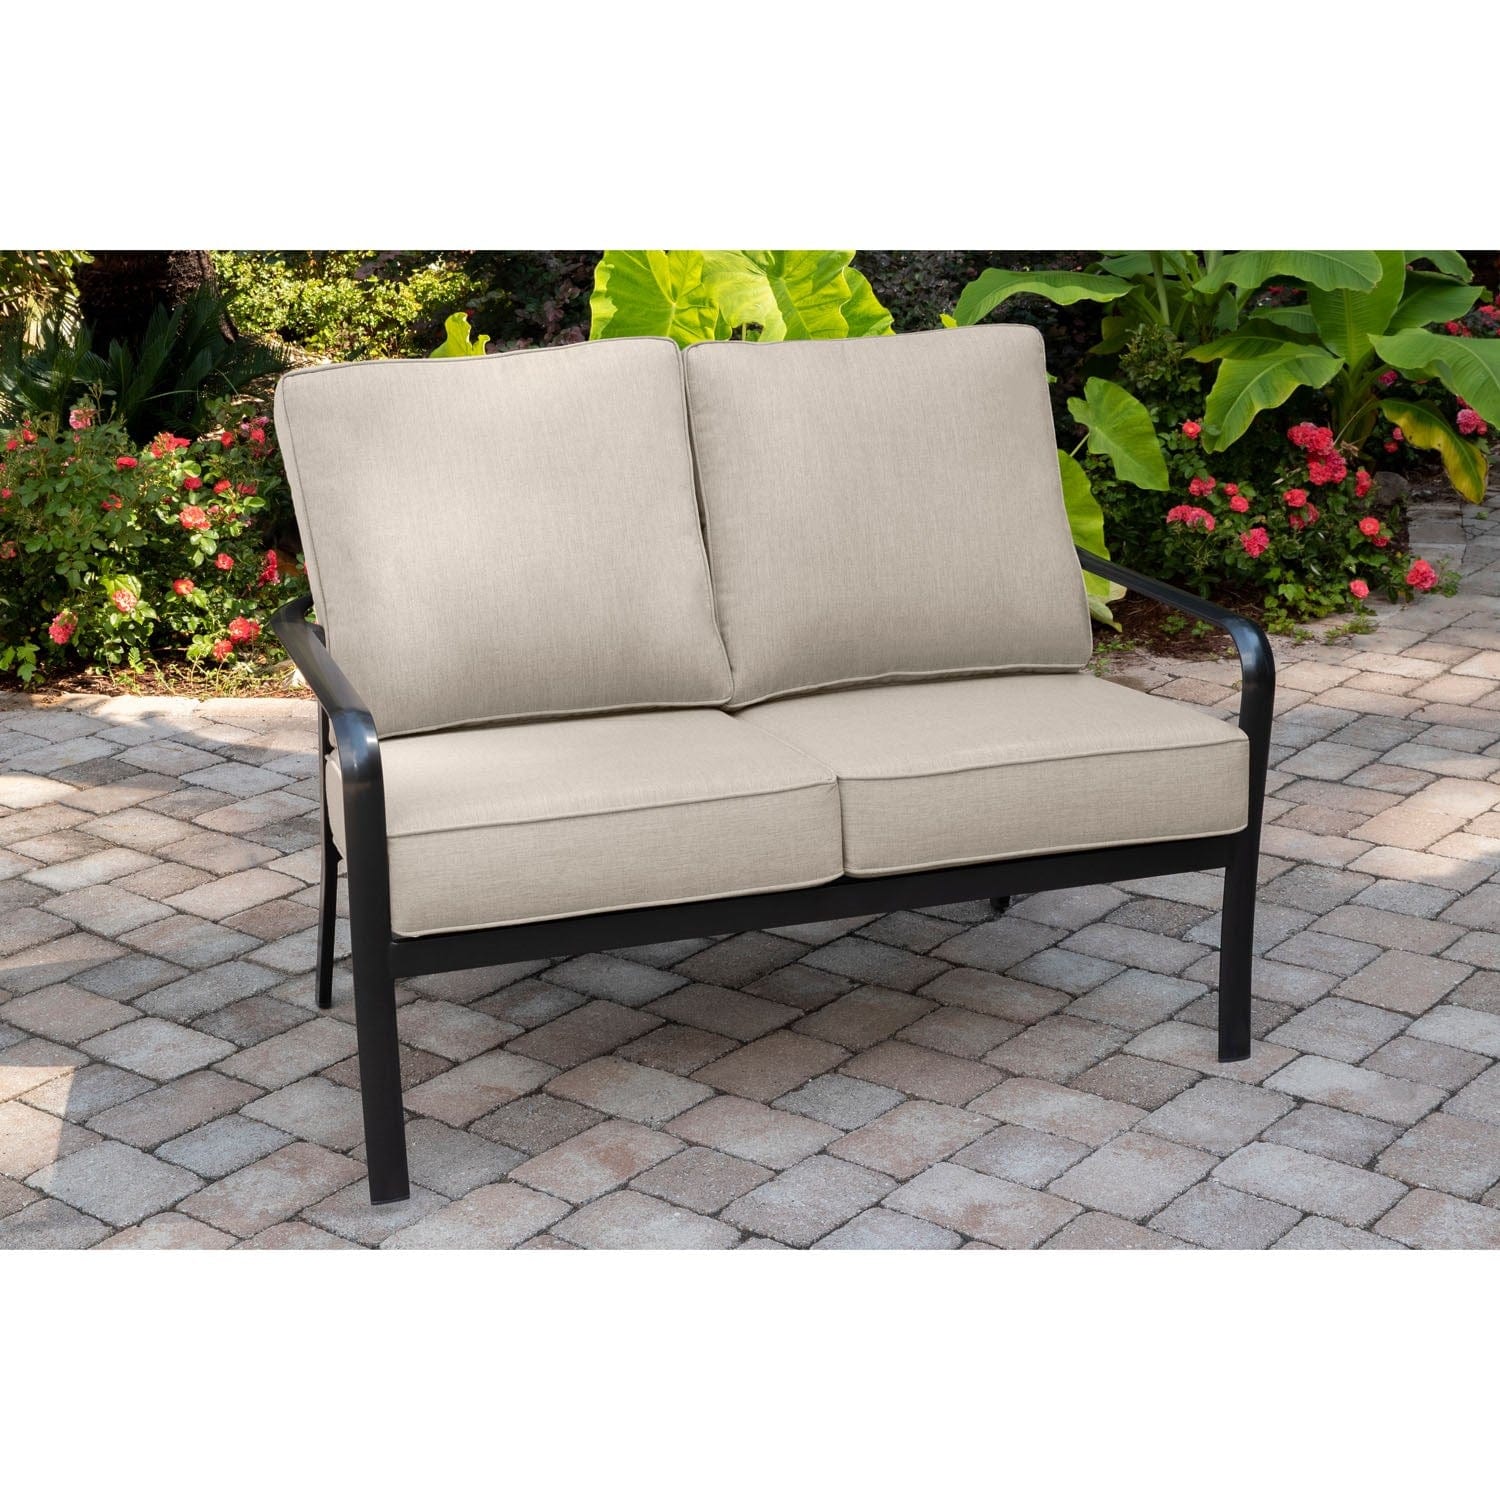 Hanover Conversation Set Hanover- Cortino 4Piece Commercial-Grade Patio Seating Set with 2 Cushioned Club Chairs, Loveseat, and Slat-Top Coffee Table | CORT4PCL-ASH